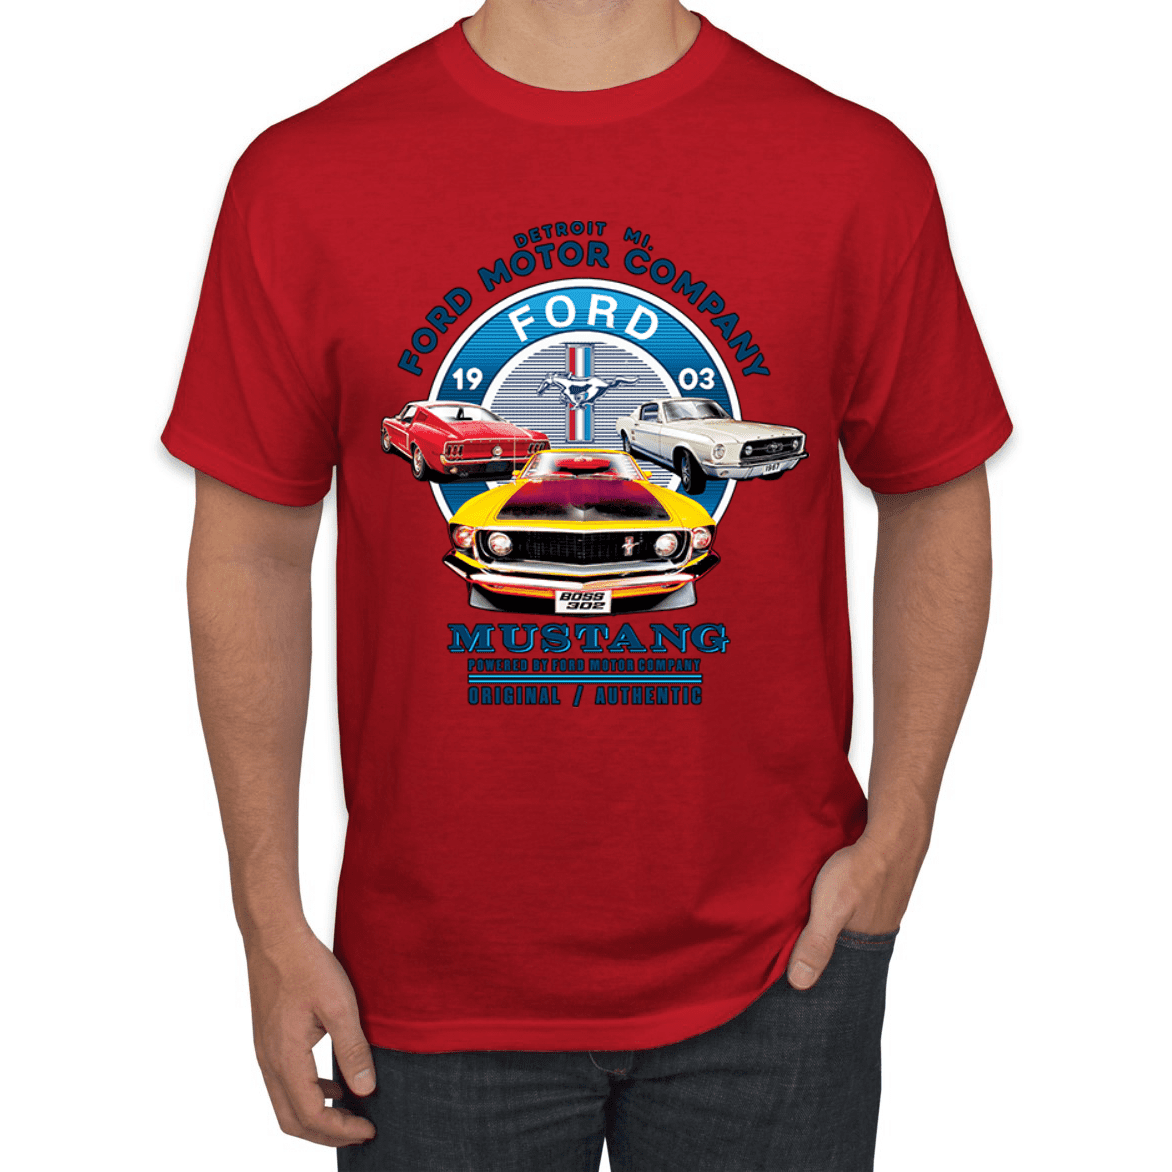 Tee Luv Ford American Made Muscle Shirt Faded Ford Motor Company Shirt 